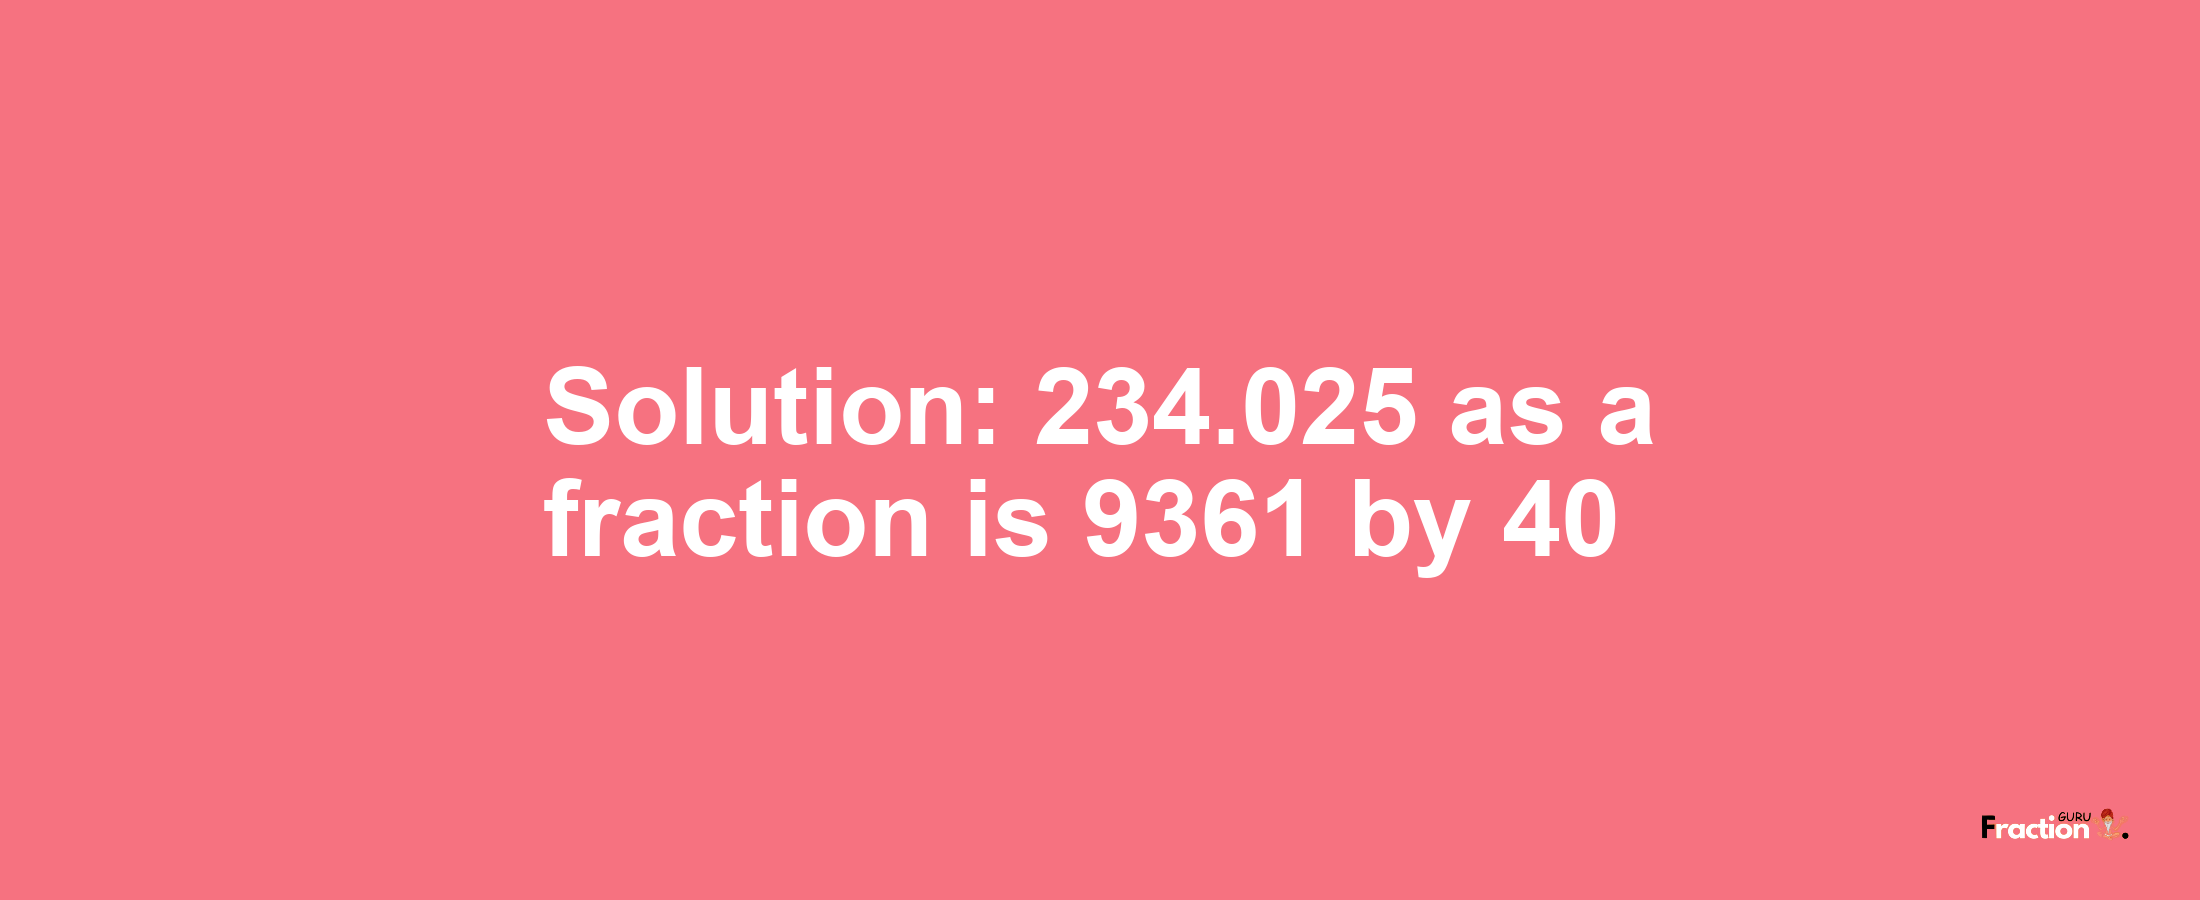 Solution:234.025 as a fraction is 9361/40